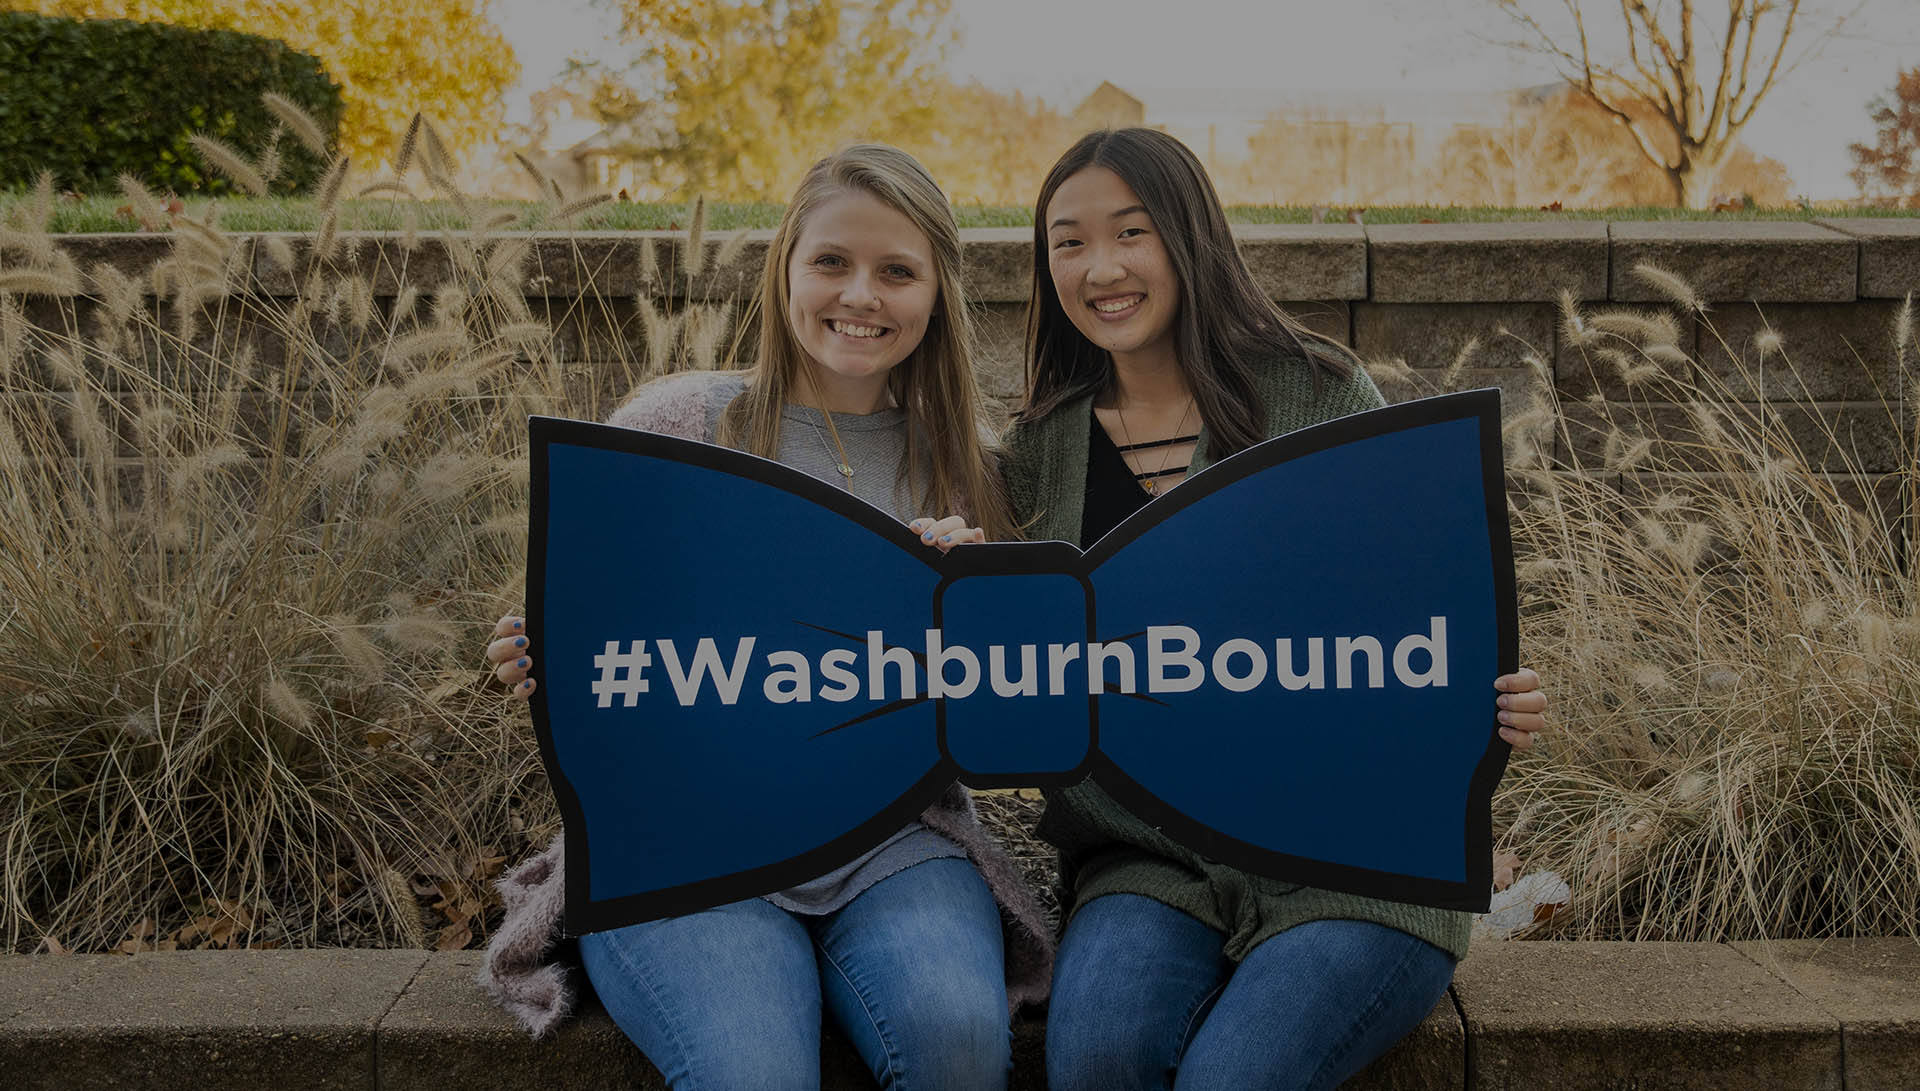 Two students smile and pose with a sign in the shape of a bow tie that says #WashburnBound.